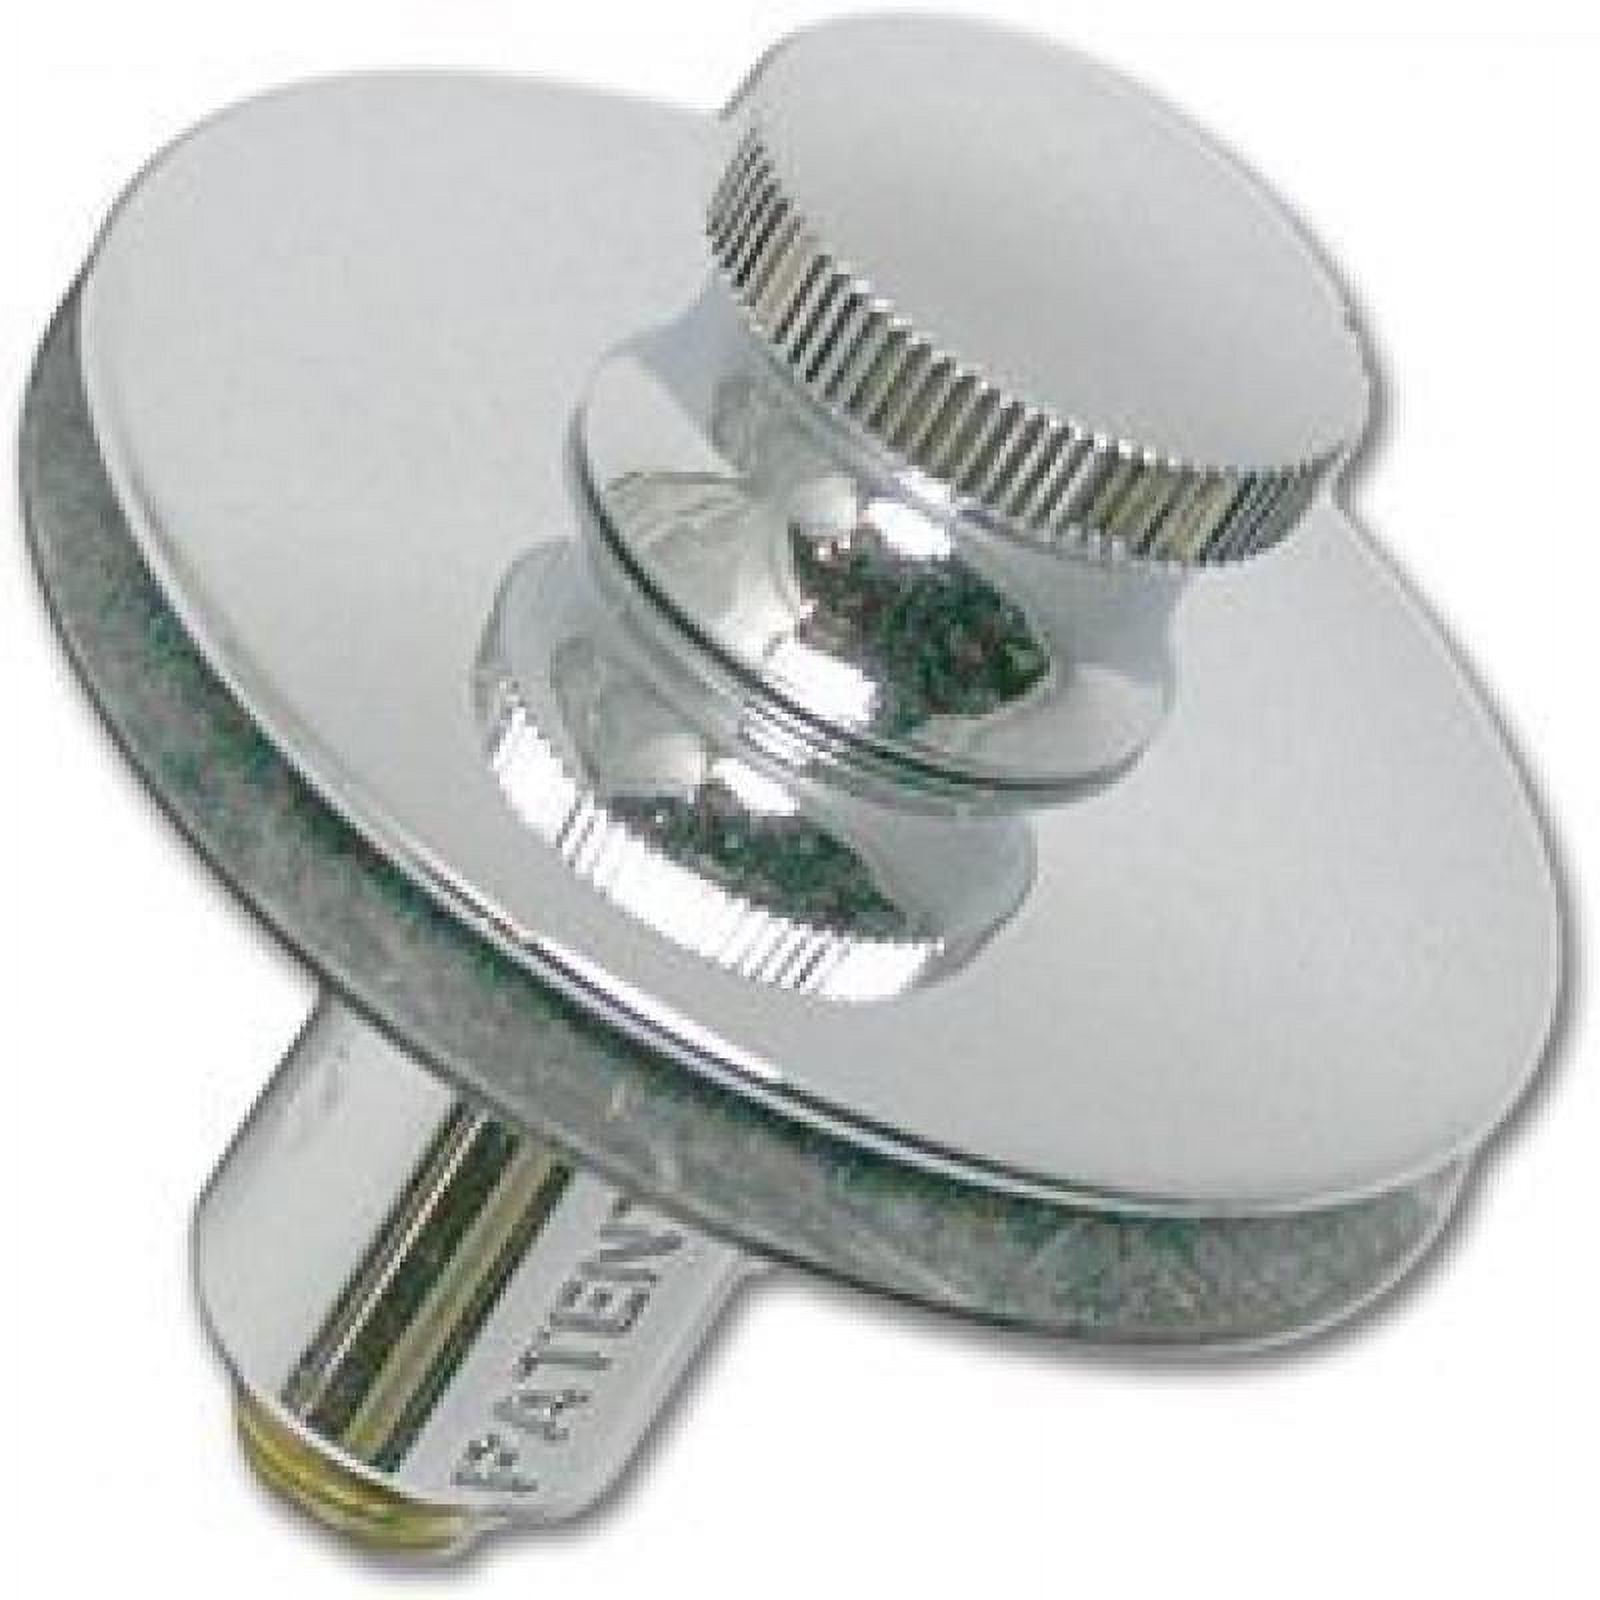 Watco Replacement Bathtub Stopper (Push Pull or Lift and Turn  Configurations)